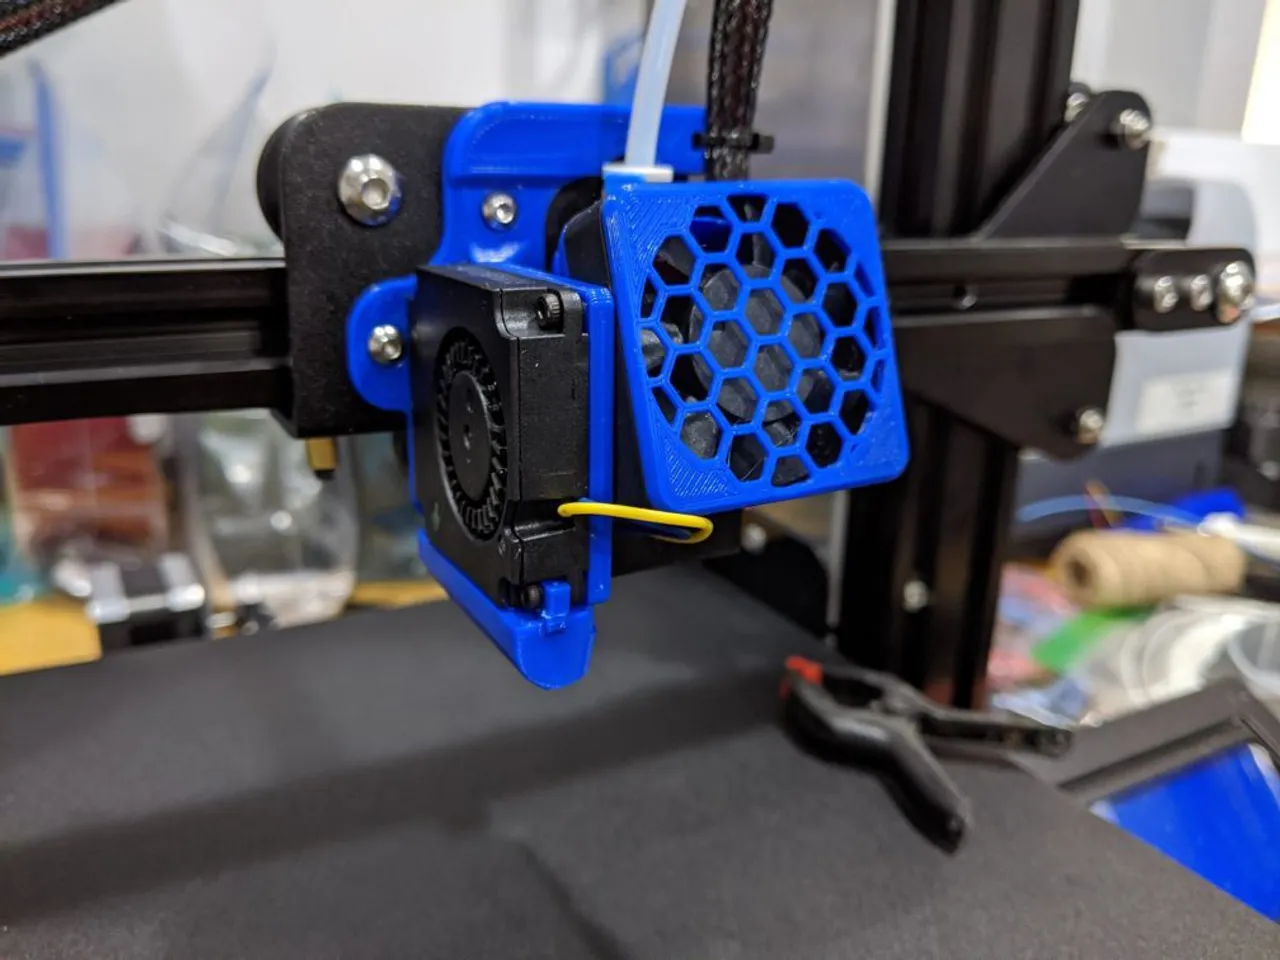 Get Creative with the Creality Ender-3 V2